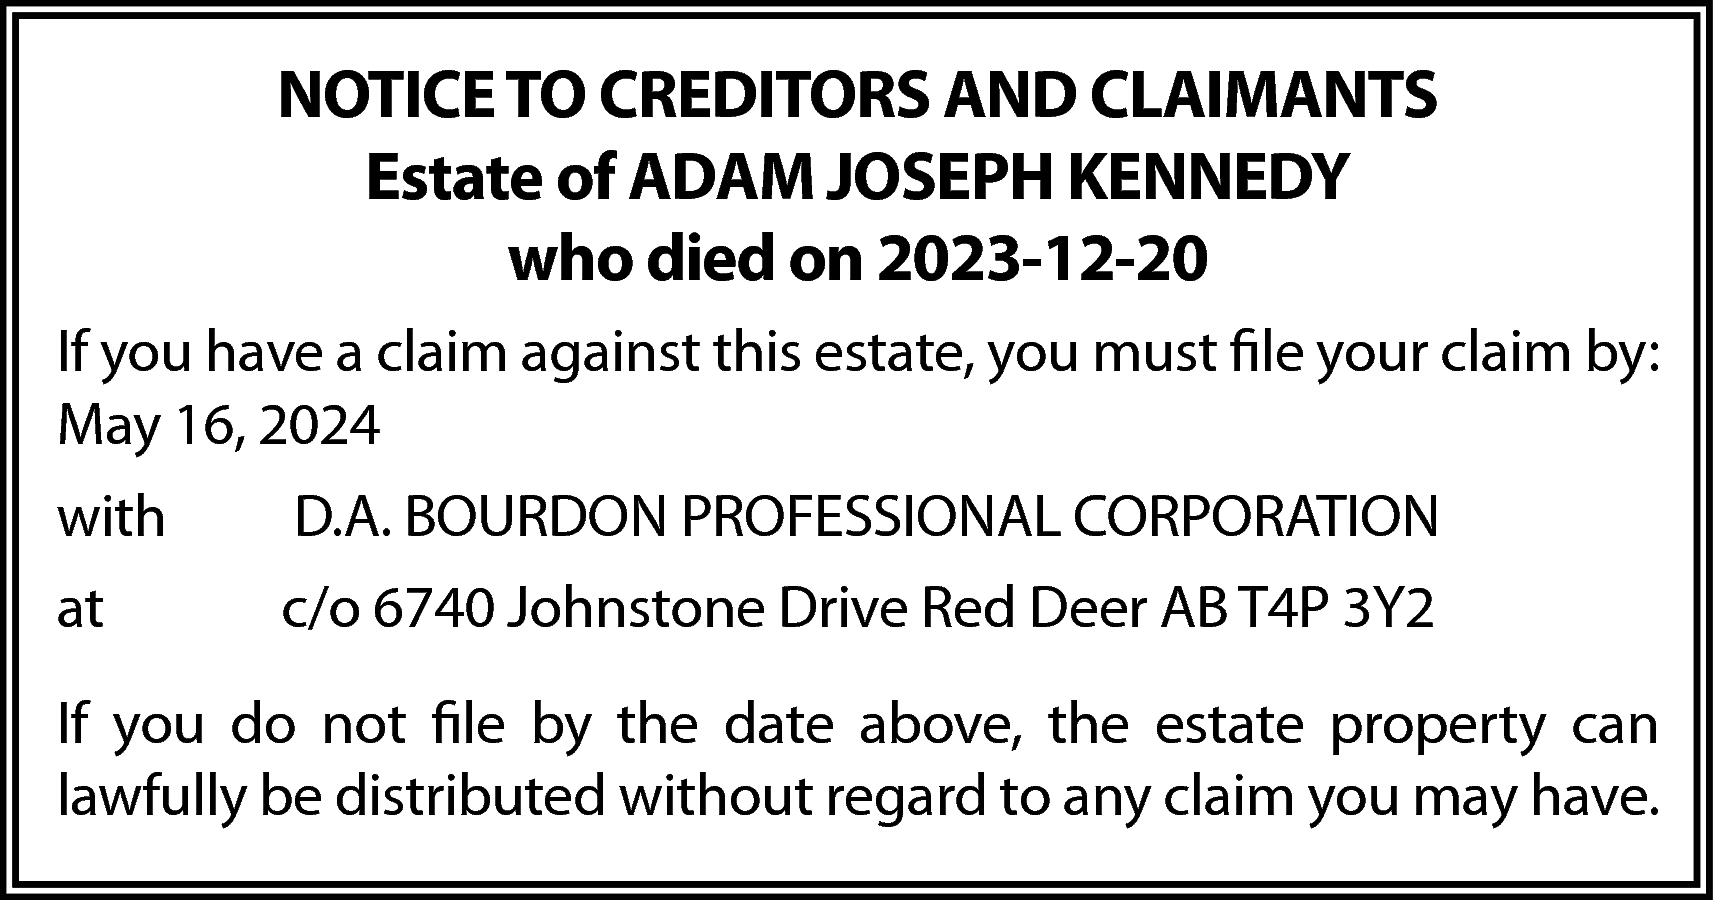 NOTICE TO CREDITORS AND CLAIMANTS  NOTICE TO CREDITORS AND CLAIMANTS  Estate of ADAM JOSEPH KENNEDY  who died on 2023-12-20  If you have a claim against this estate, you must file your claim by:  May 16, 2024  with    D.A. BOURDON PROFESSIONAL CORPORATION    at    c/o 6740 Johnstone Drive Red Deer AB T4P 3Y2    If you do not file by the date above, the estate property can  lawfully be distributed without regard to any claim you may have.    